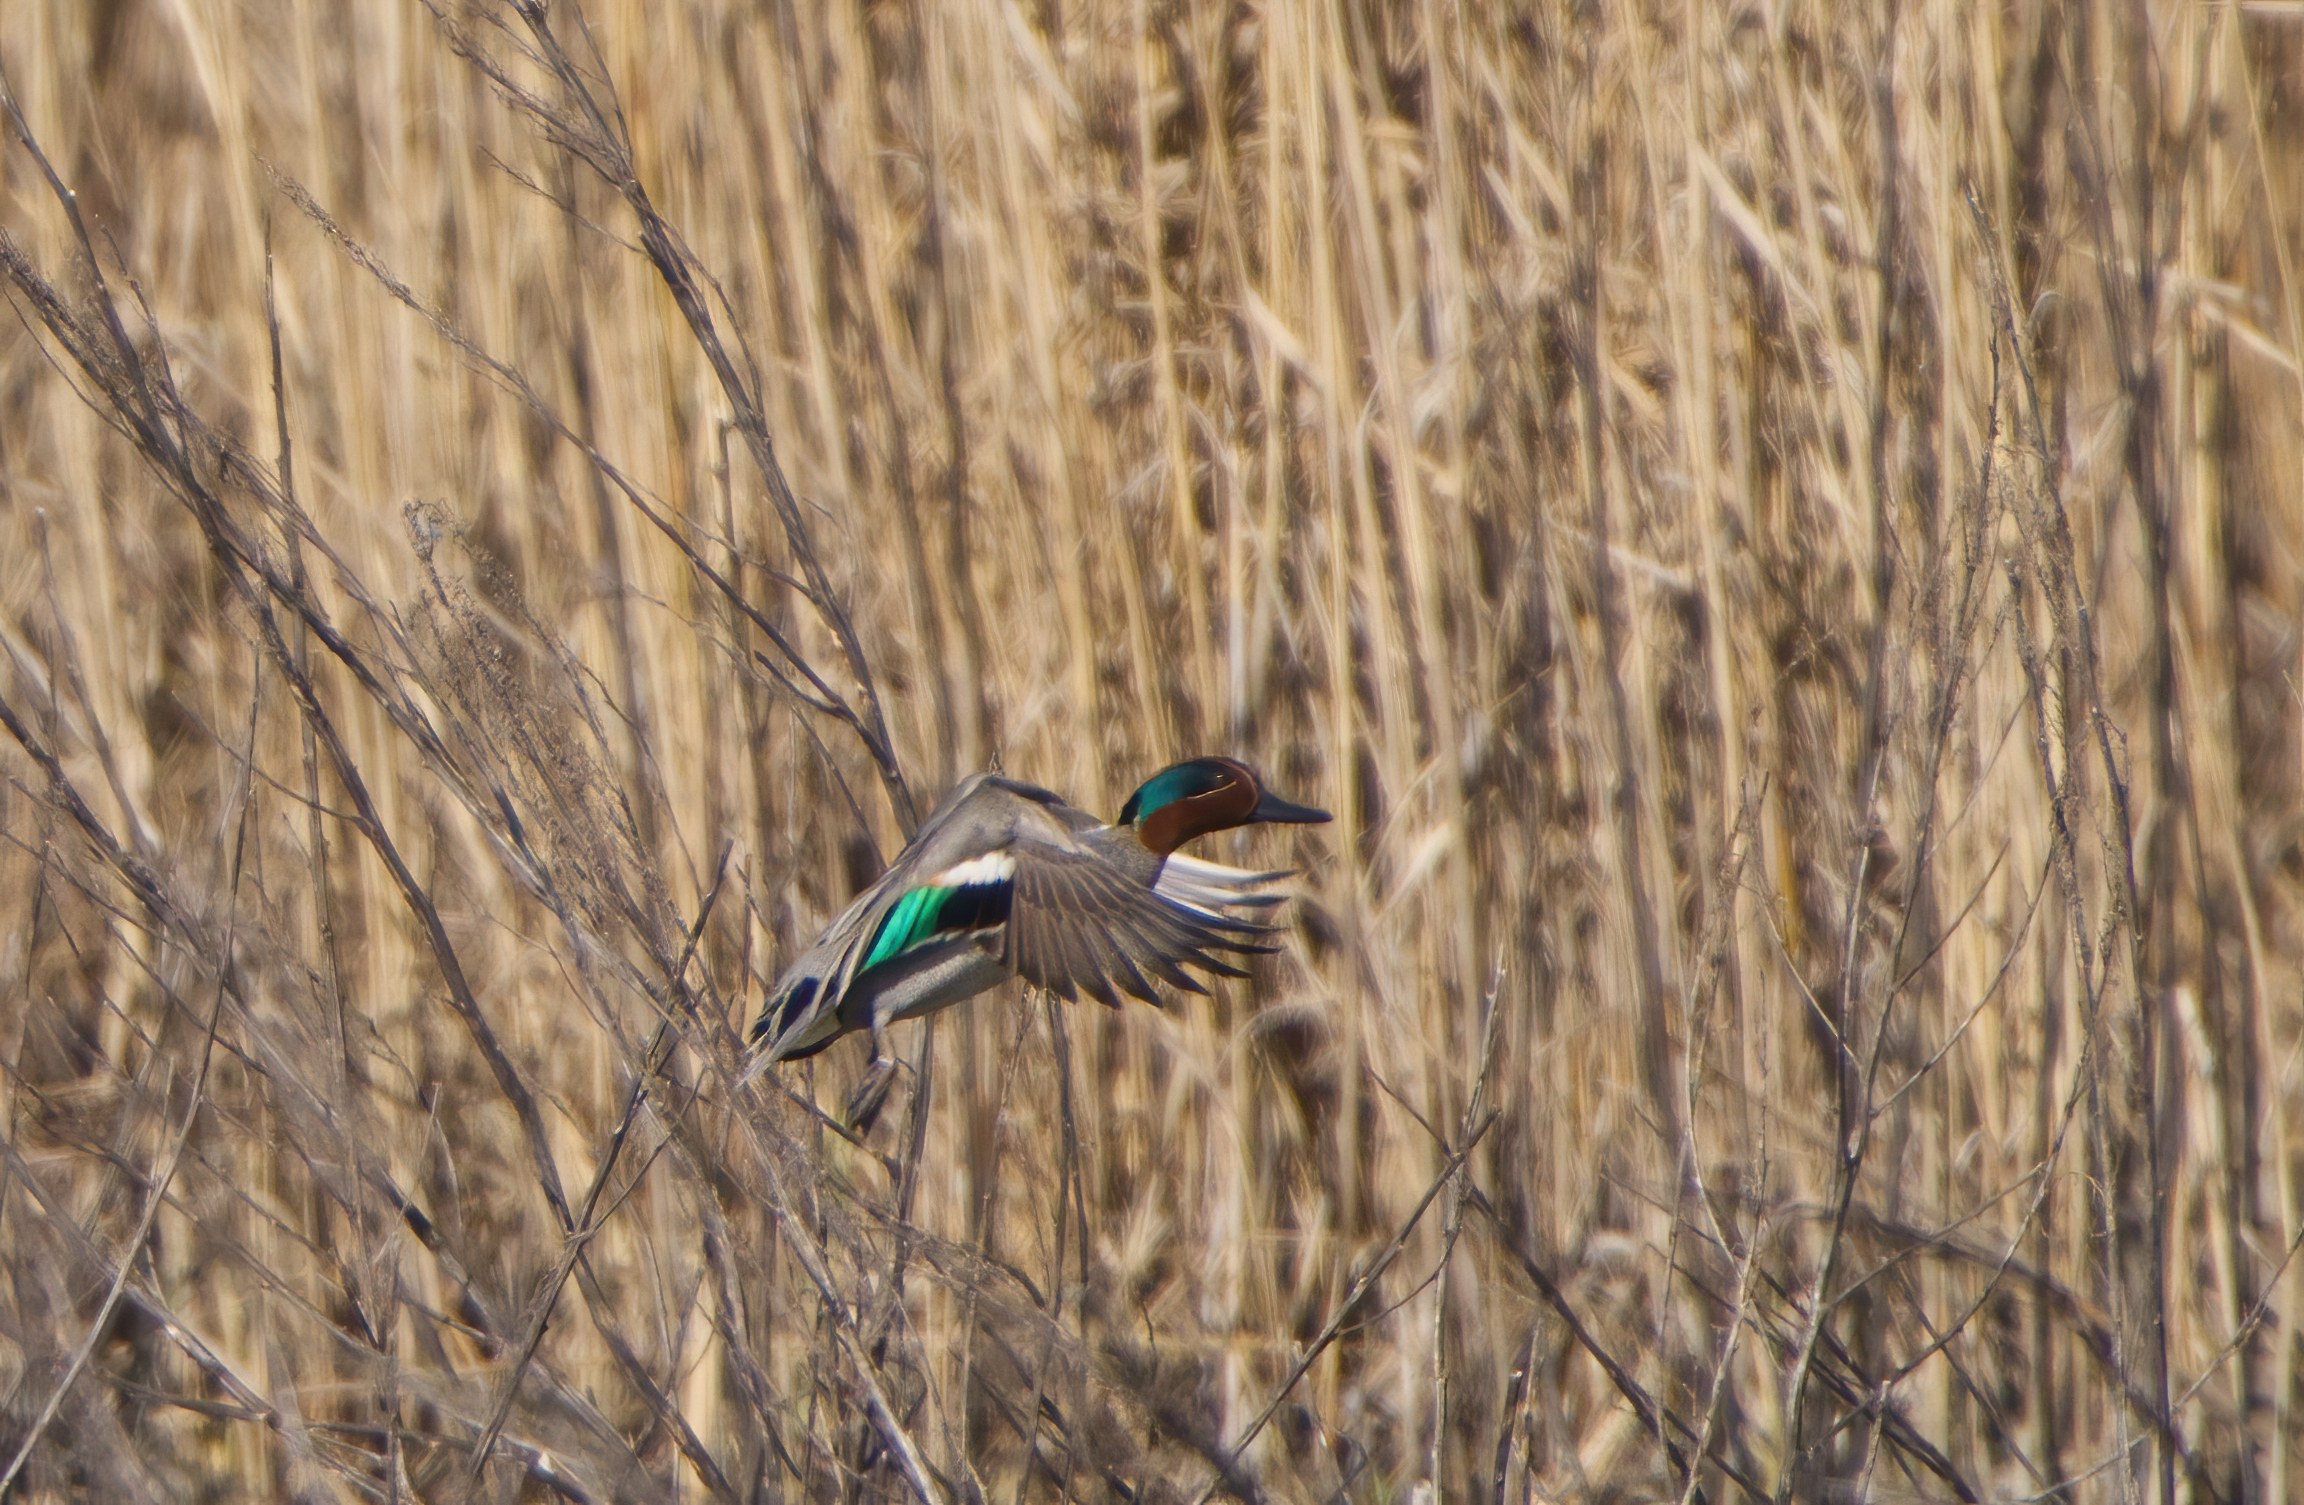 Flying in the reeds...